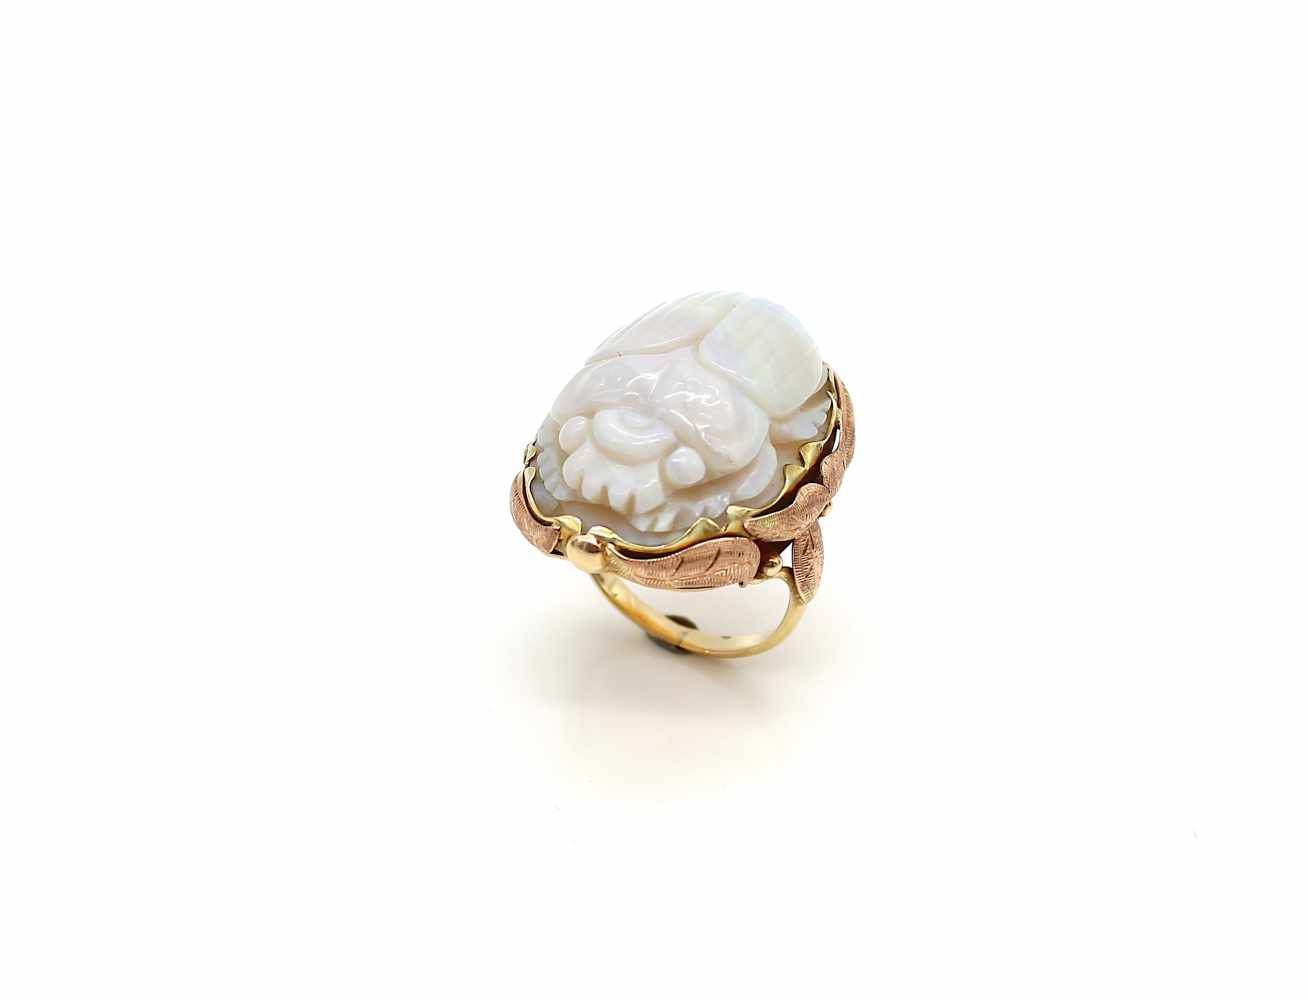 Ring in 585 gold with an opal in the shape of a scarab.Weight 12,2 g, size 55, opal dimensions : - Image 4 of 4